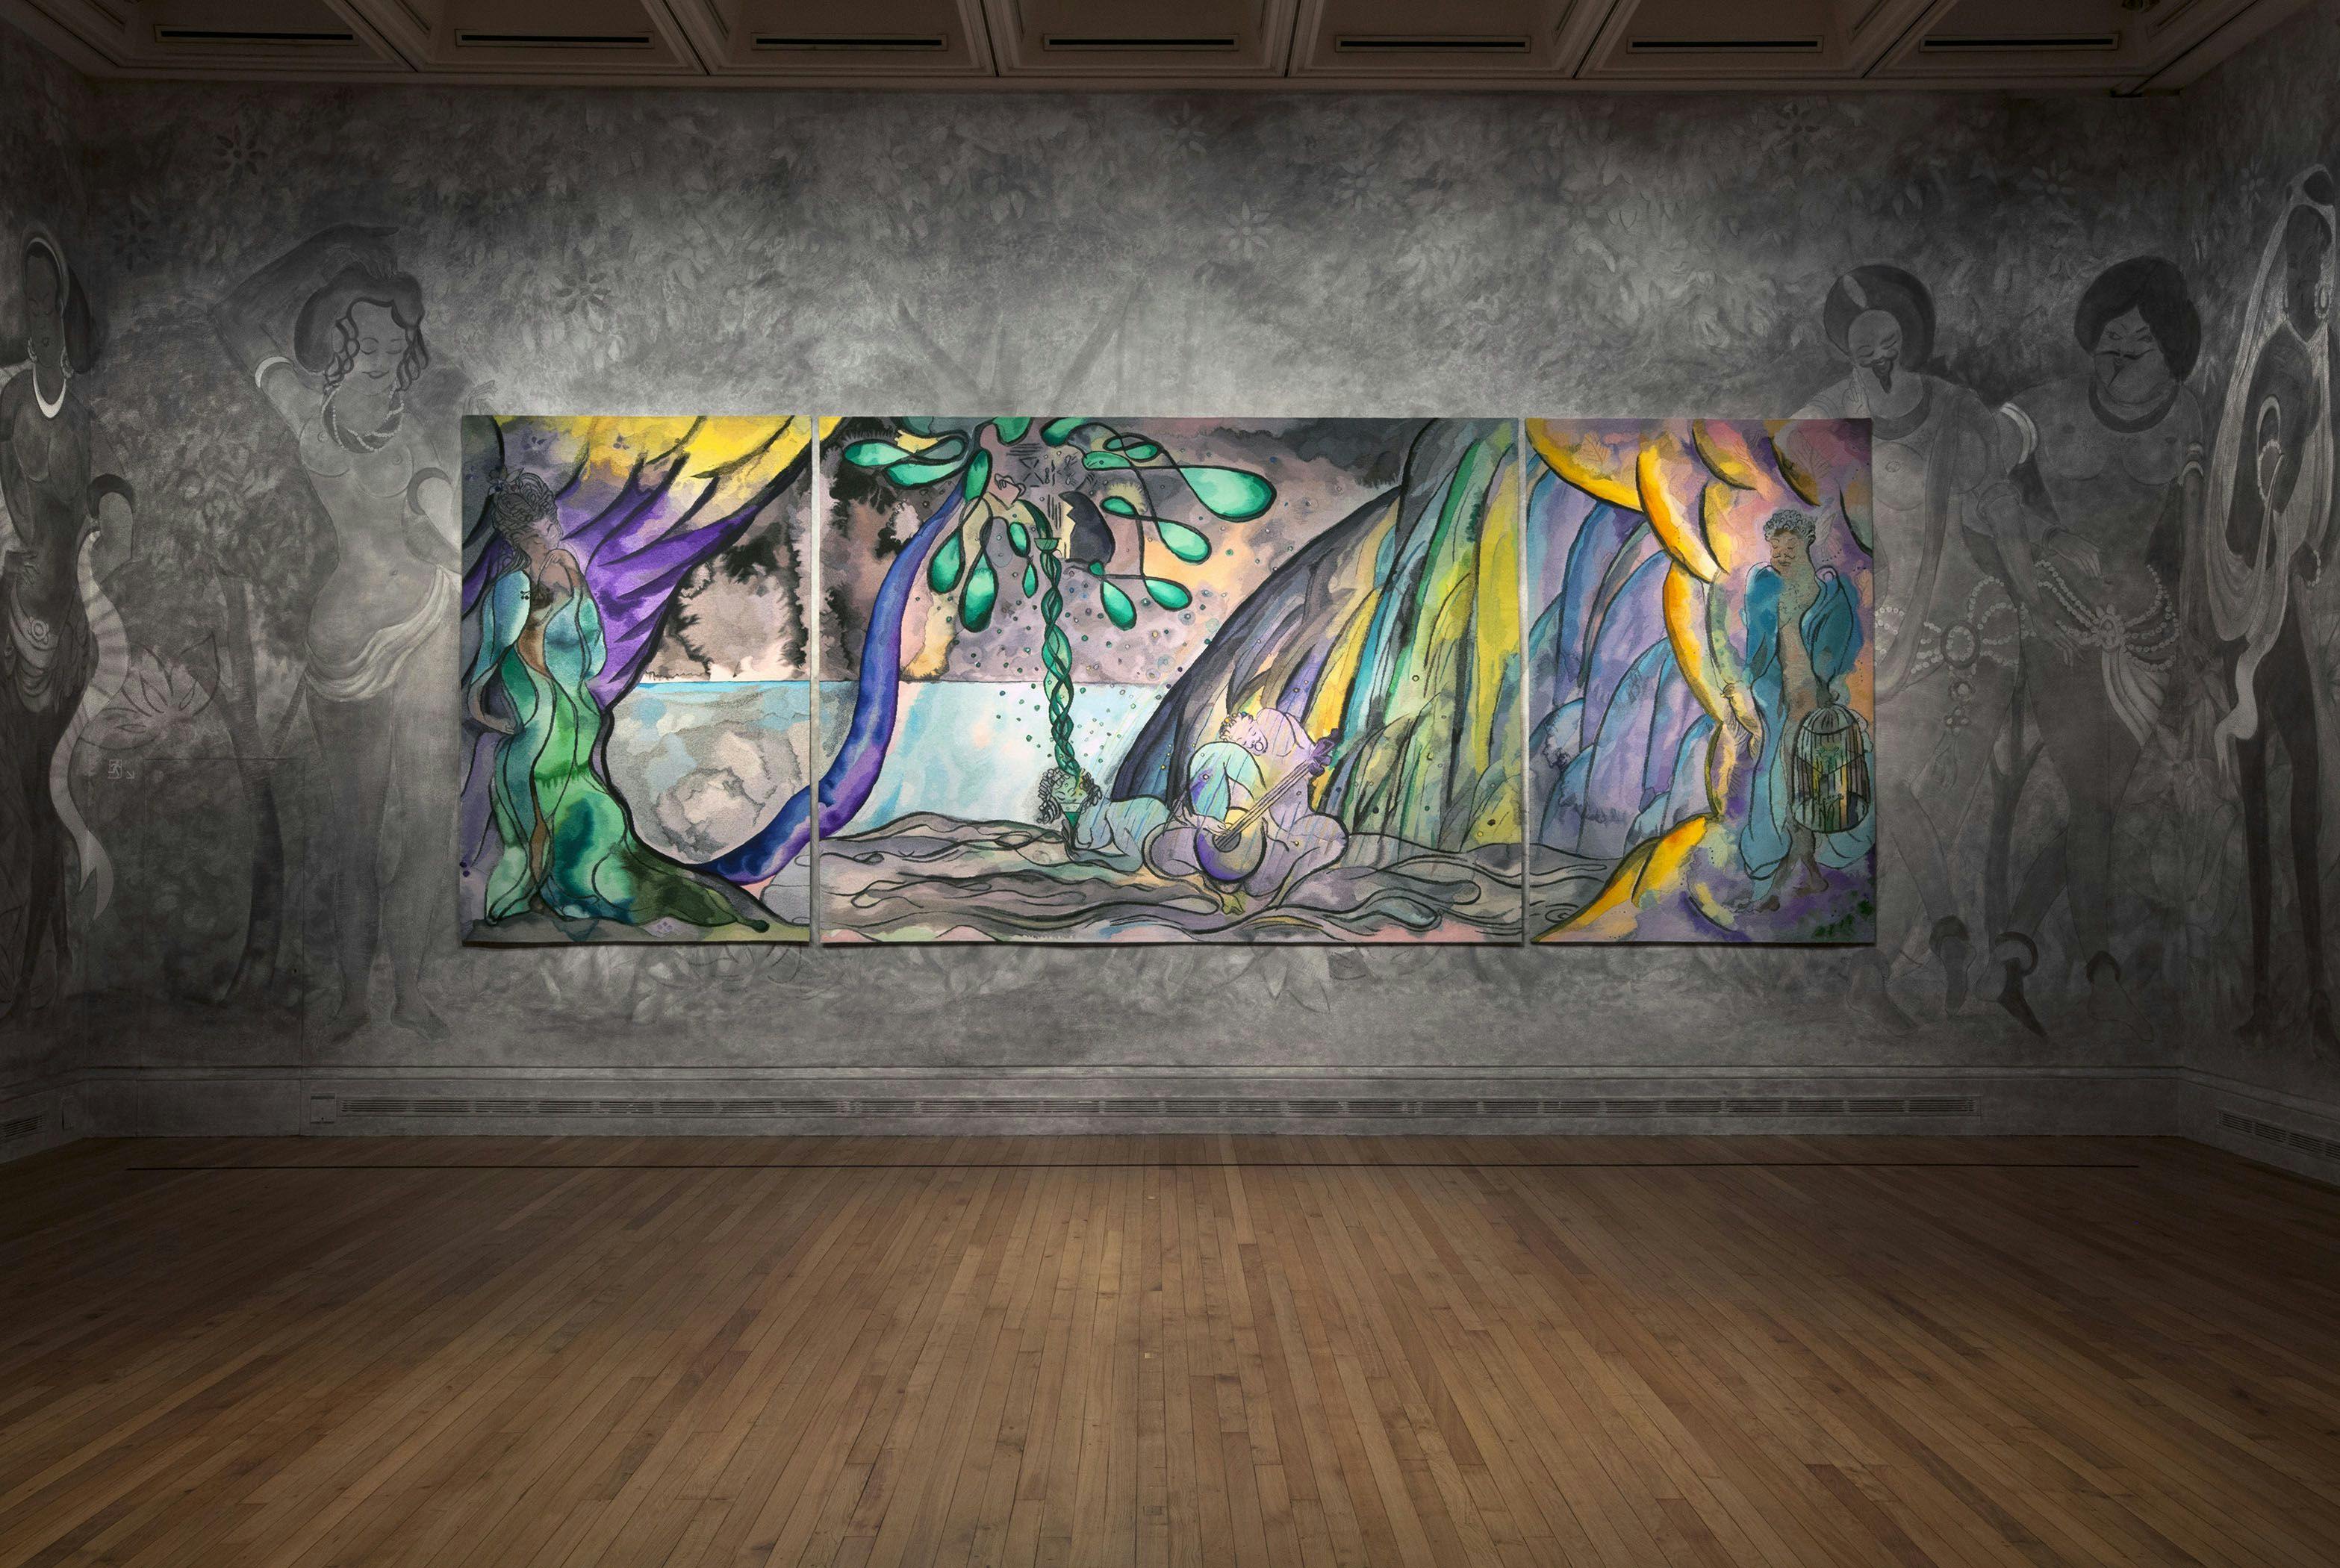 Installation view of the exhibition, Chris Ofili, Weaving Magic, at The National Gallery in London, dated 2017..